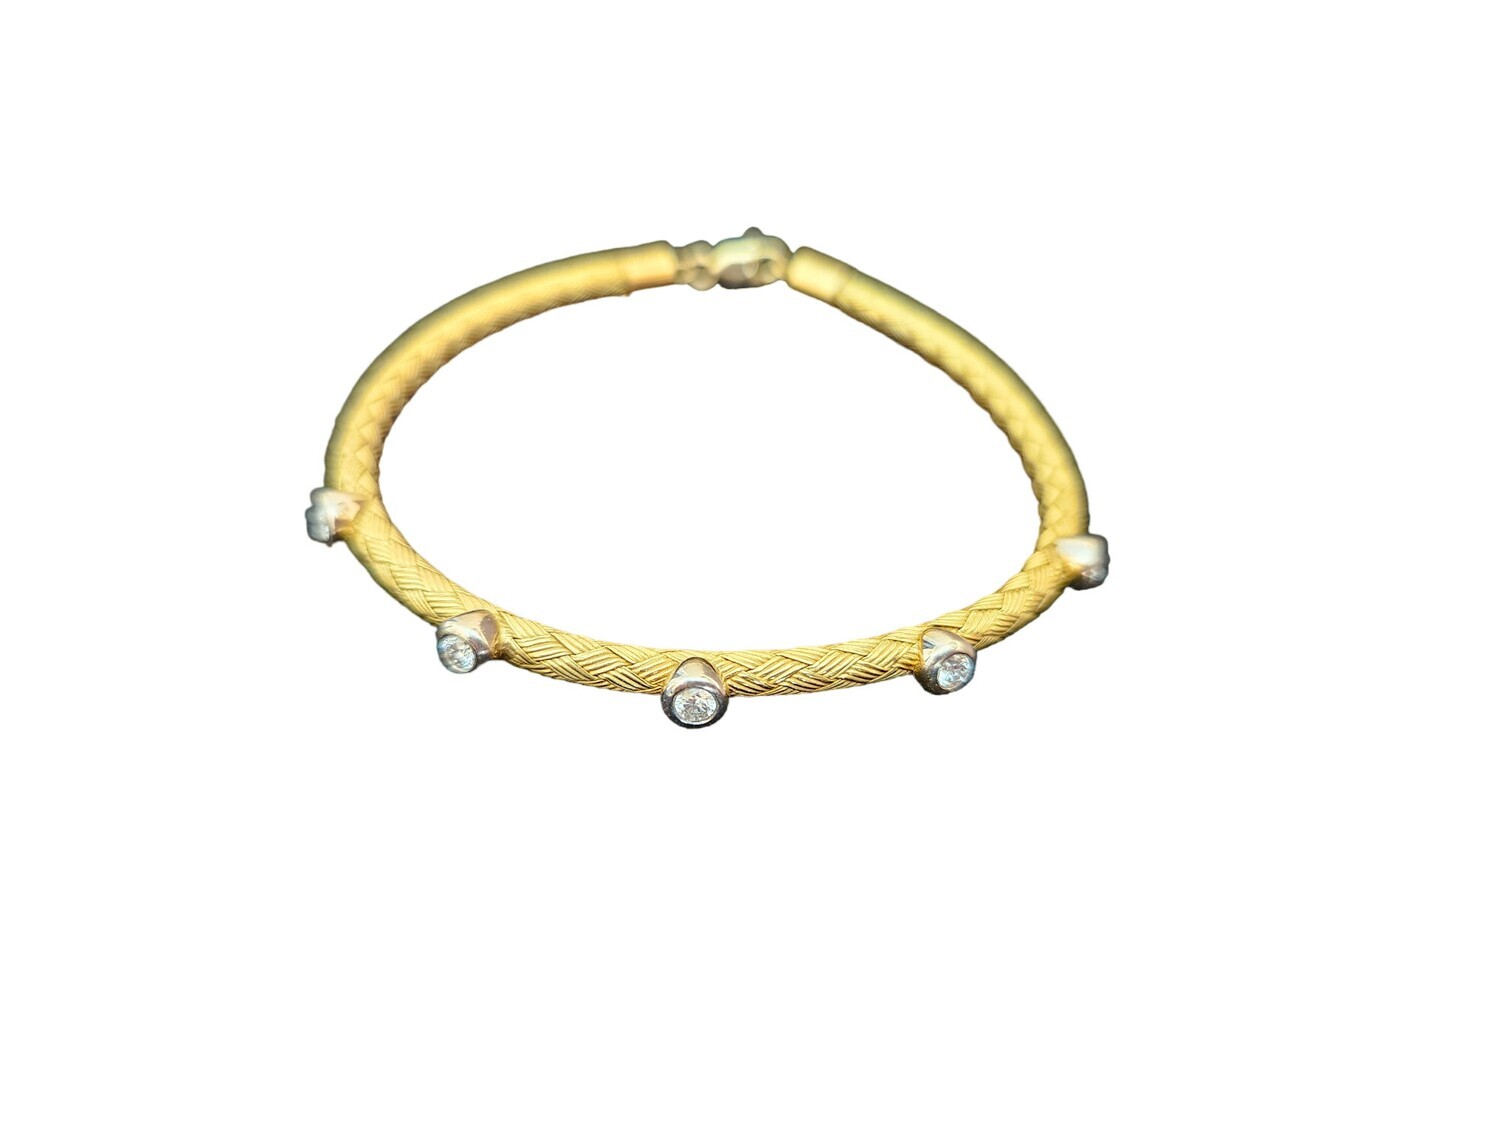 Woven 18kt Yellow Gold and Natural Diamond Bracelet - 7.5" Long 10.23 grams tw.